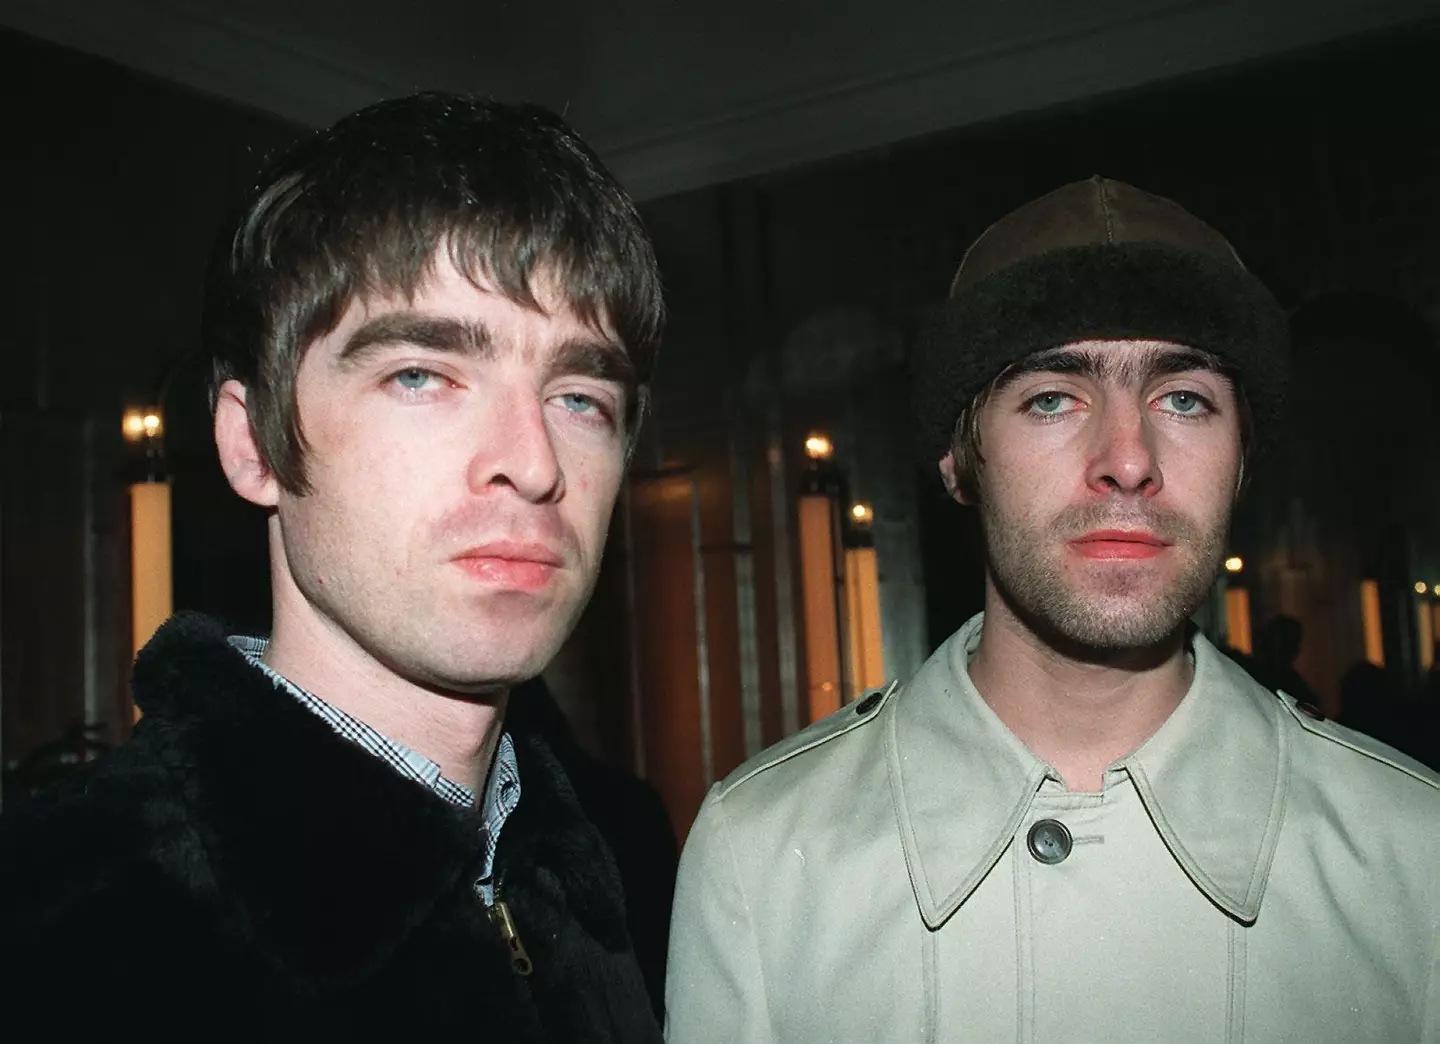 The two Gallagher brothers in their Oasis days.